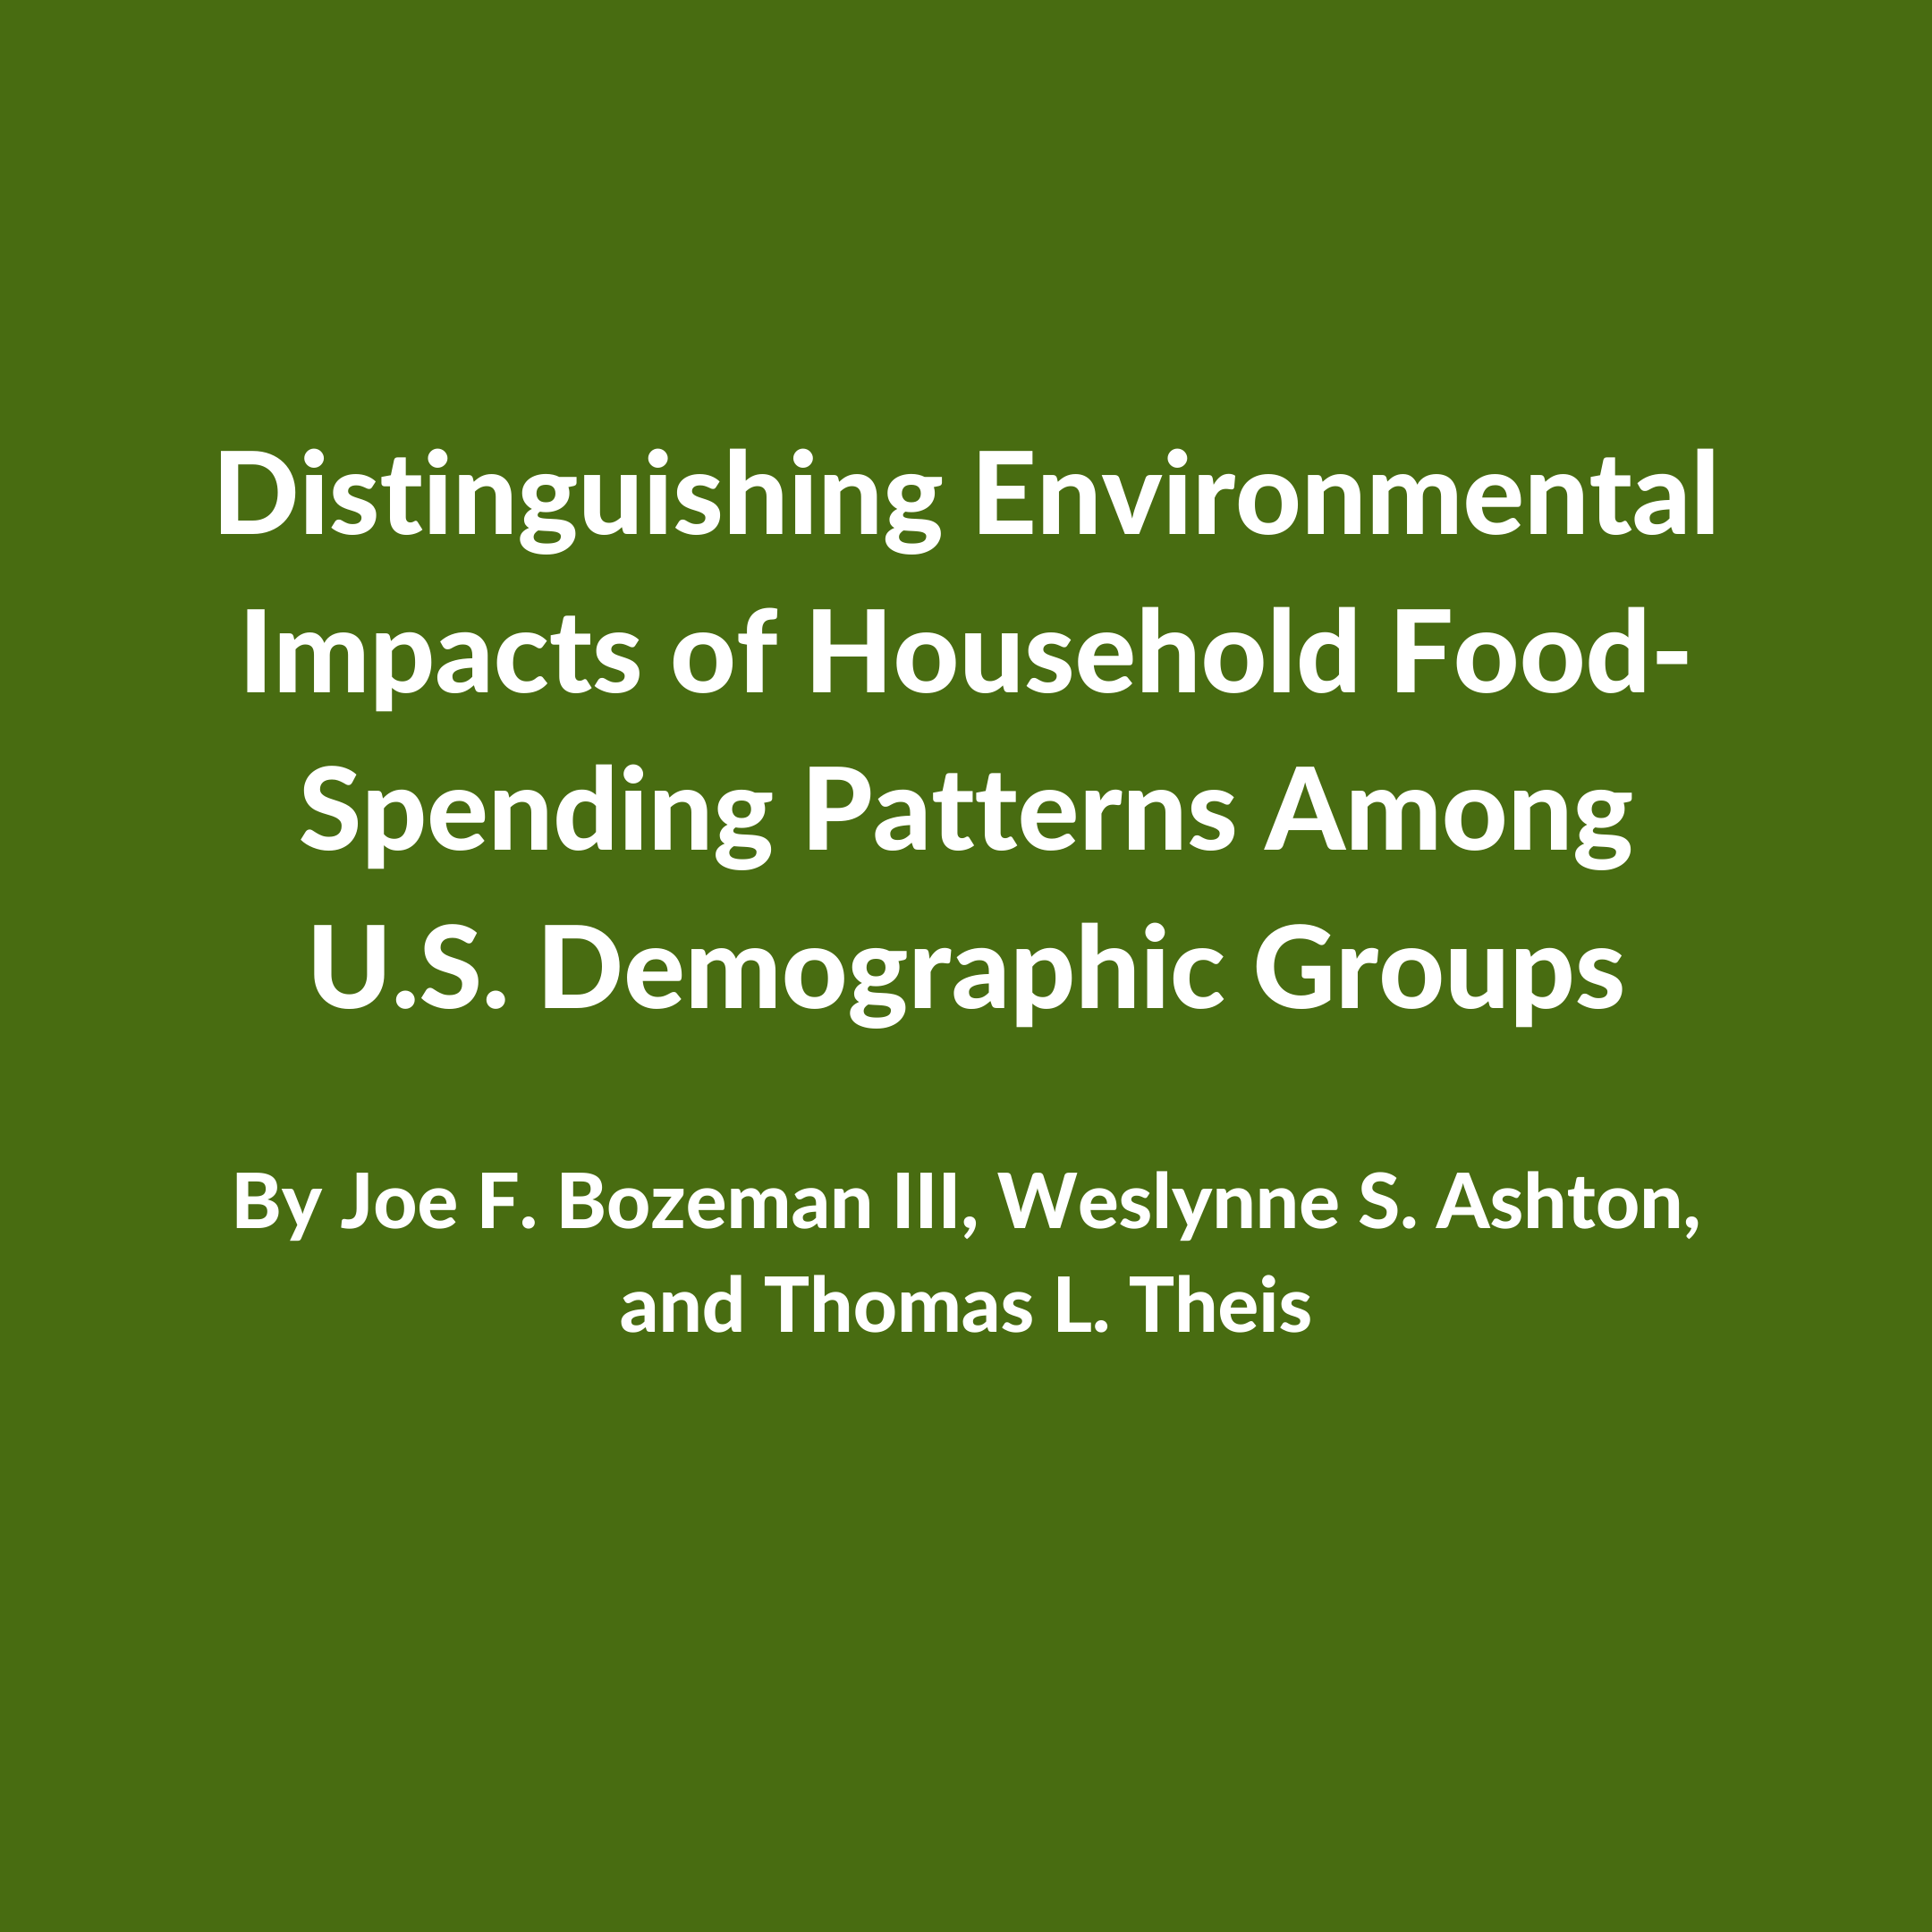 Distinguishing Environmental Impacts Of Household Food Spending Patterns Among U S Demographic Groups